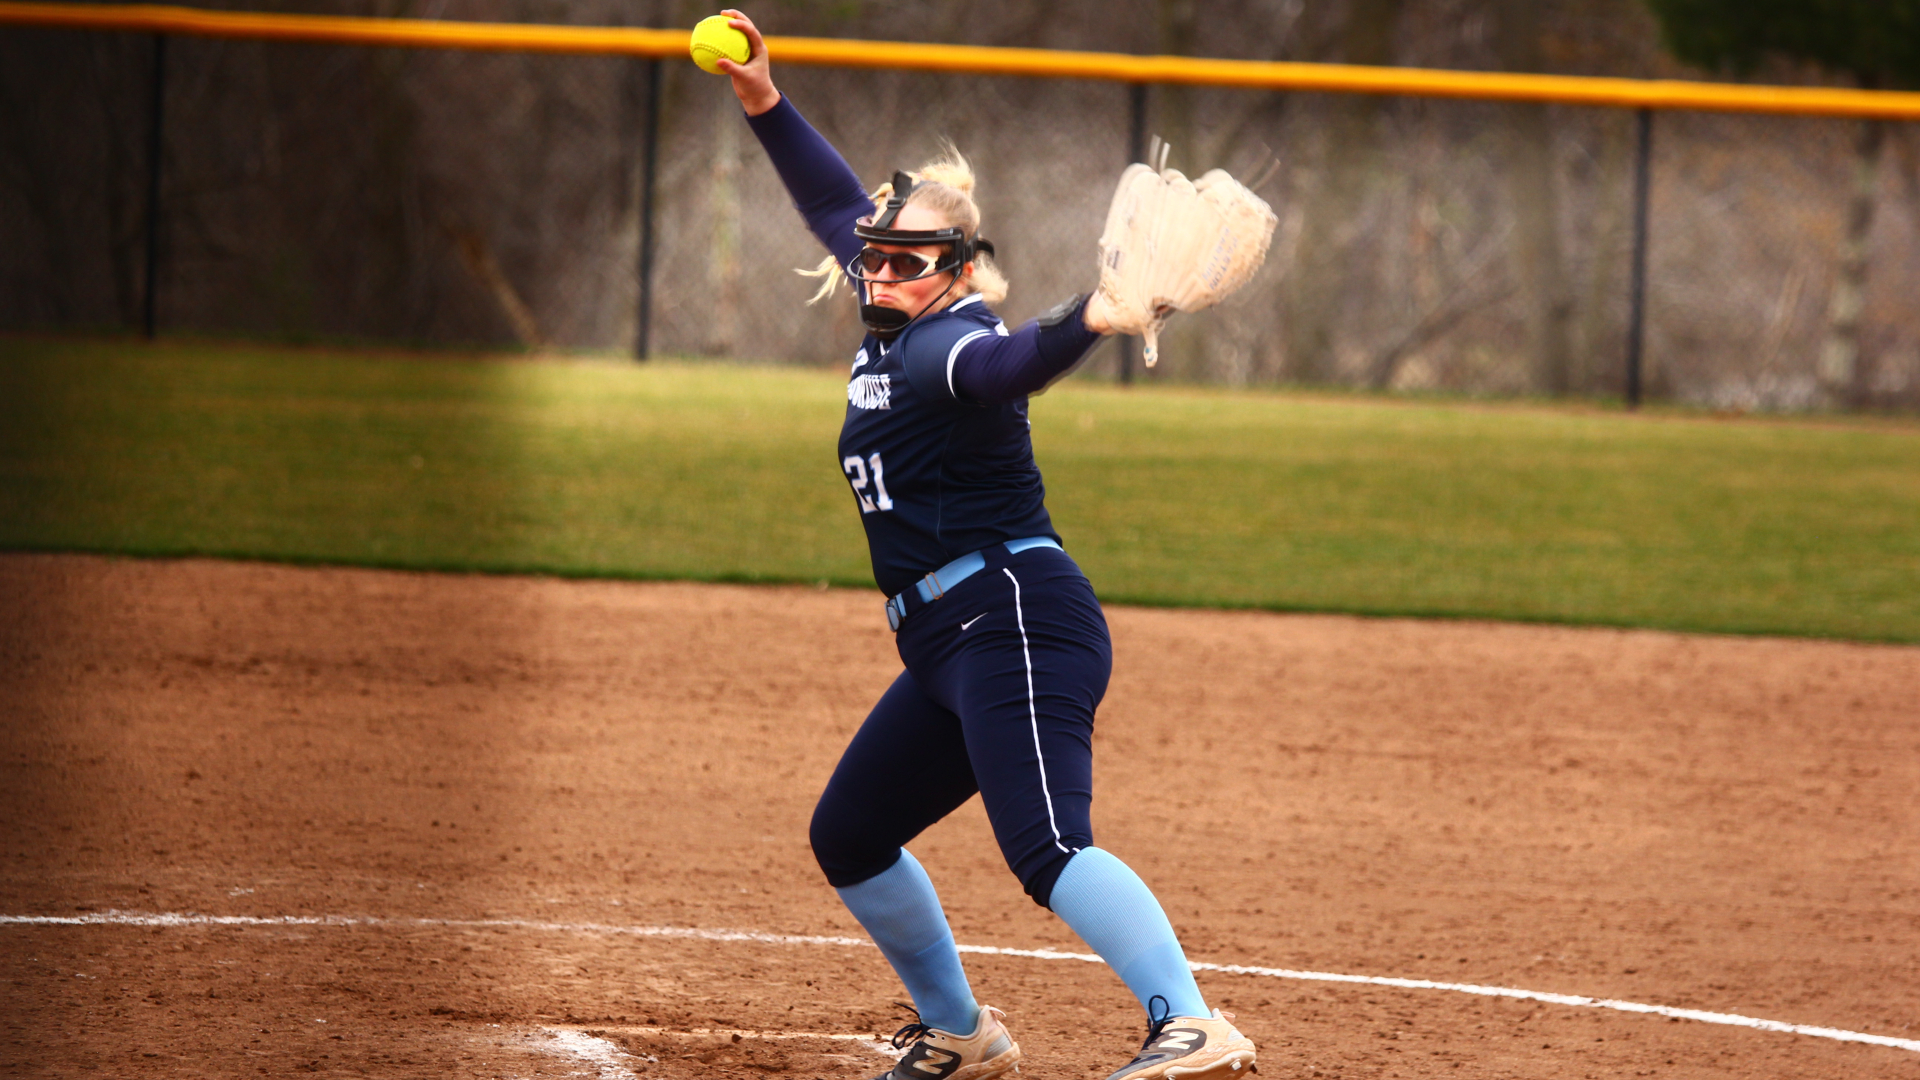 St. Ambrose loses twice to open CCAC play